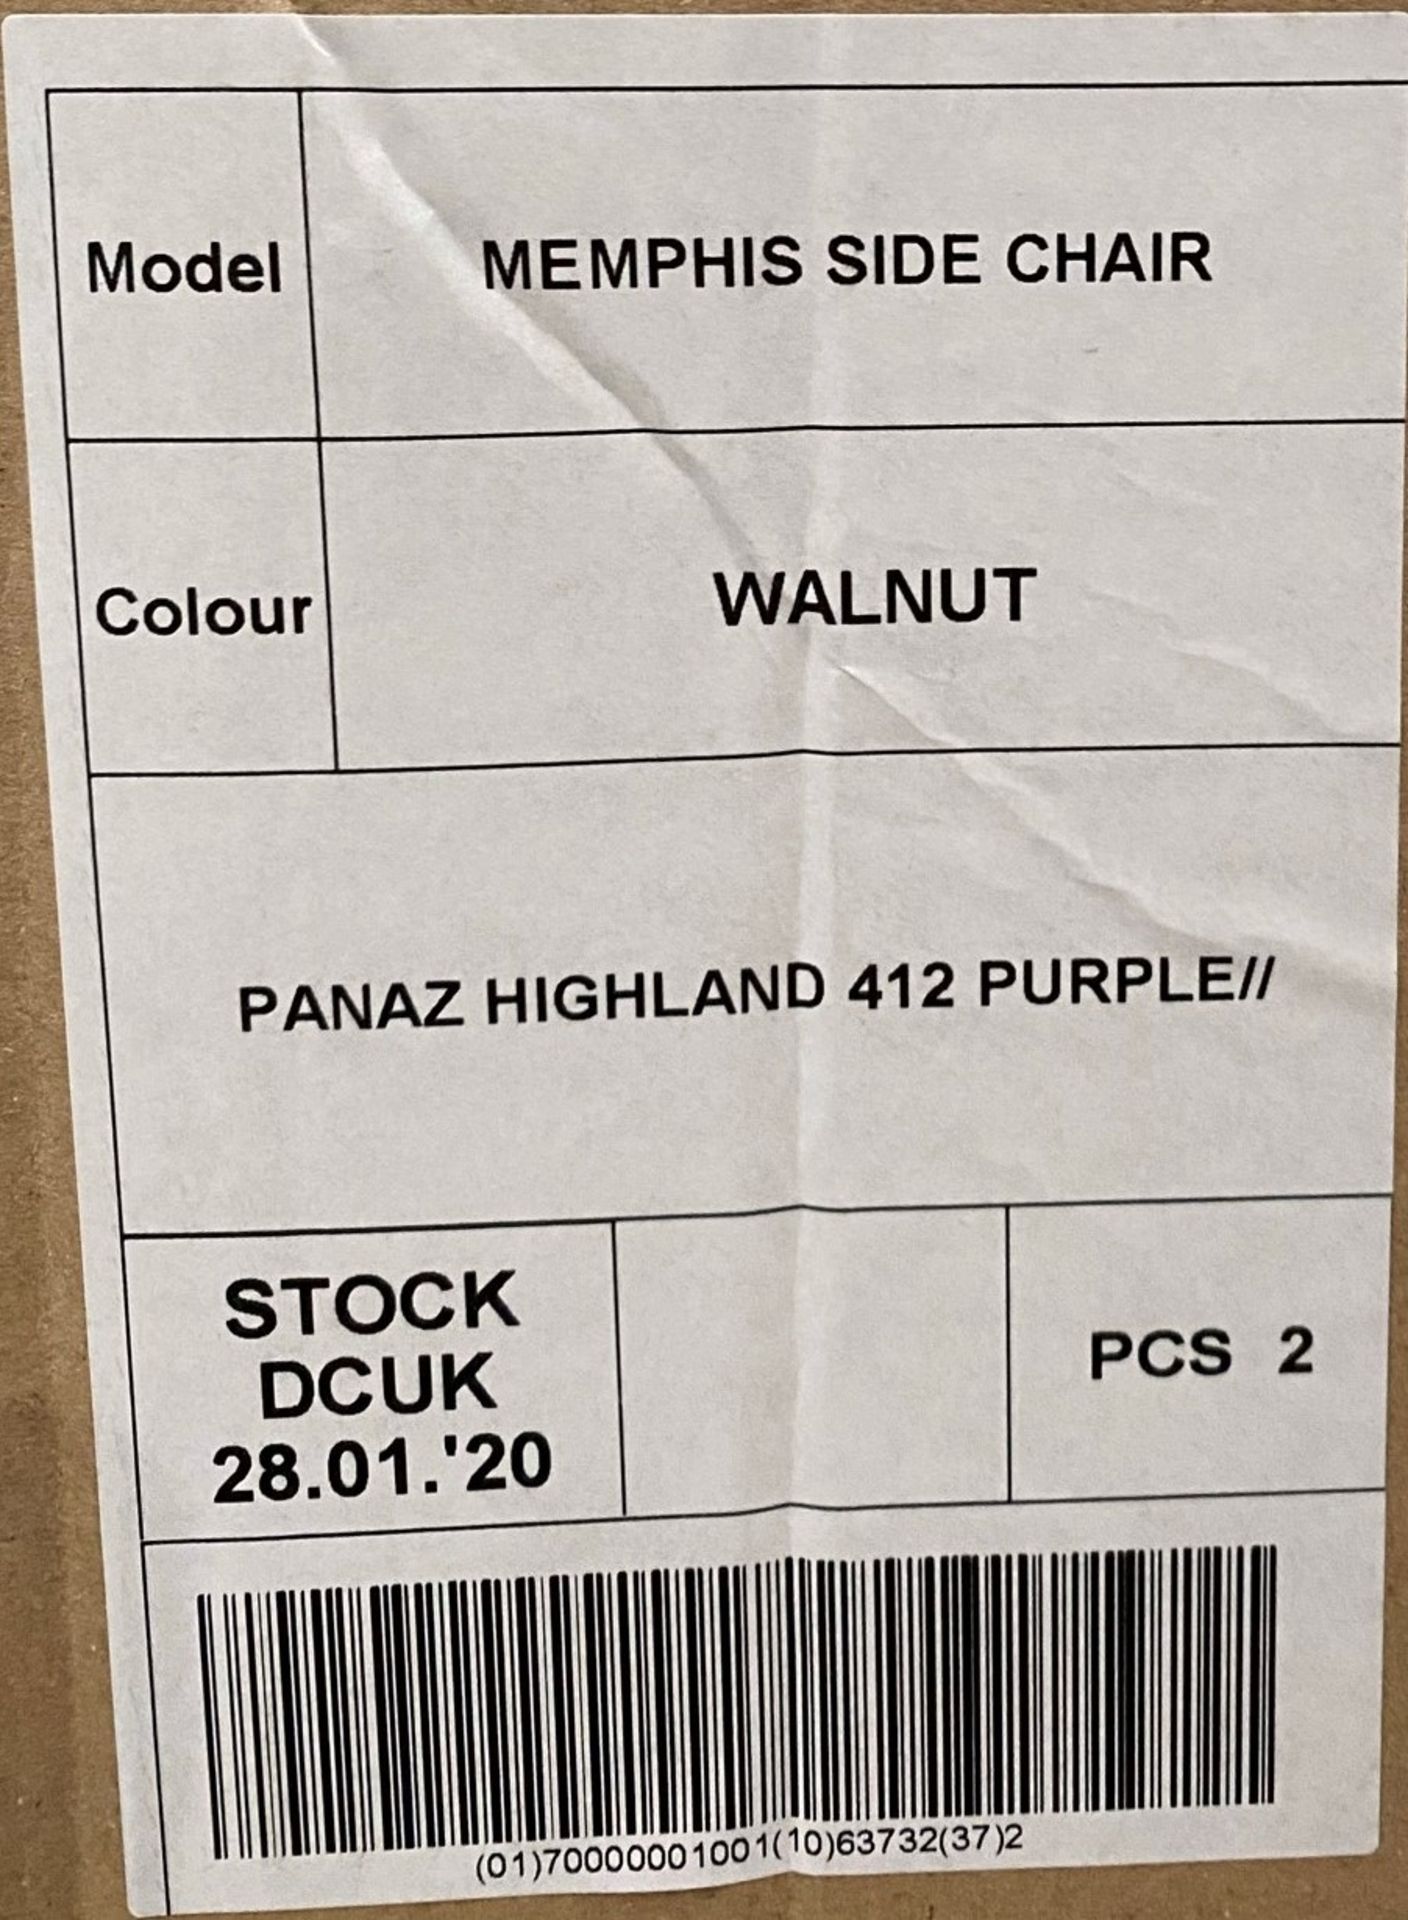 2 x Memphis Panaz Highland 412 Purple side/dining chairs with walnut coloured frames - Image 3 of 3